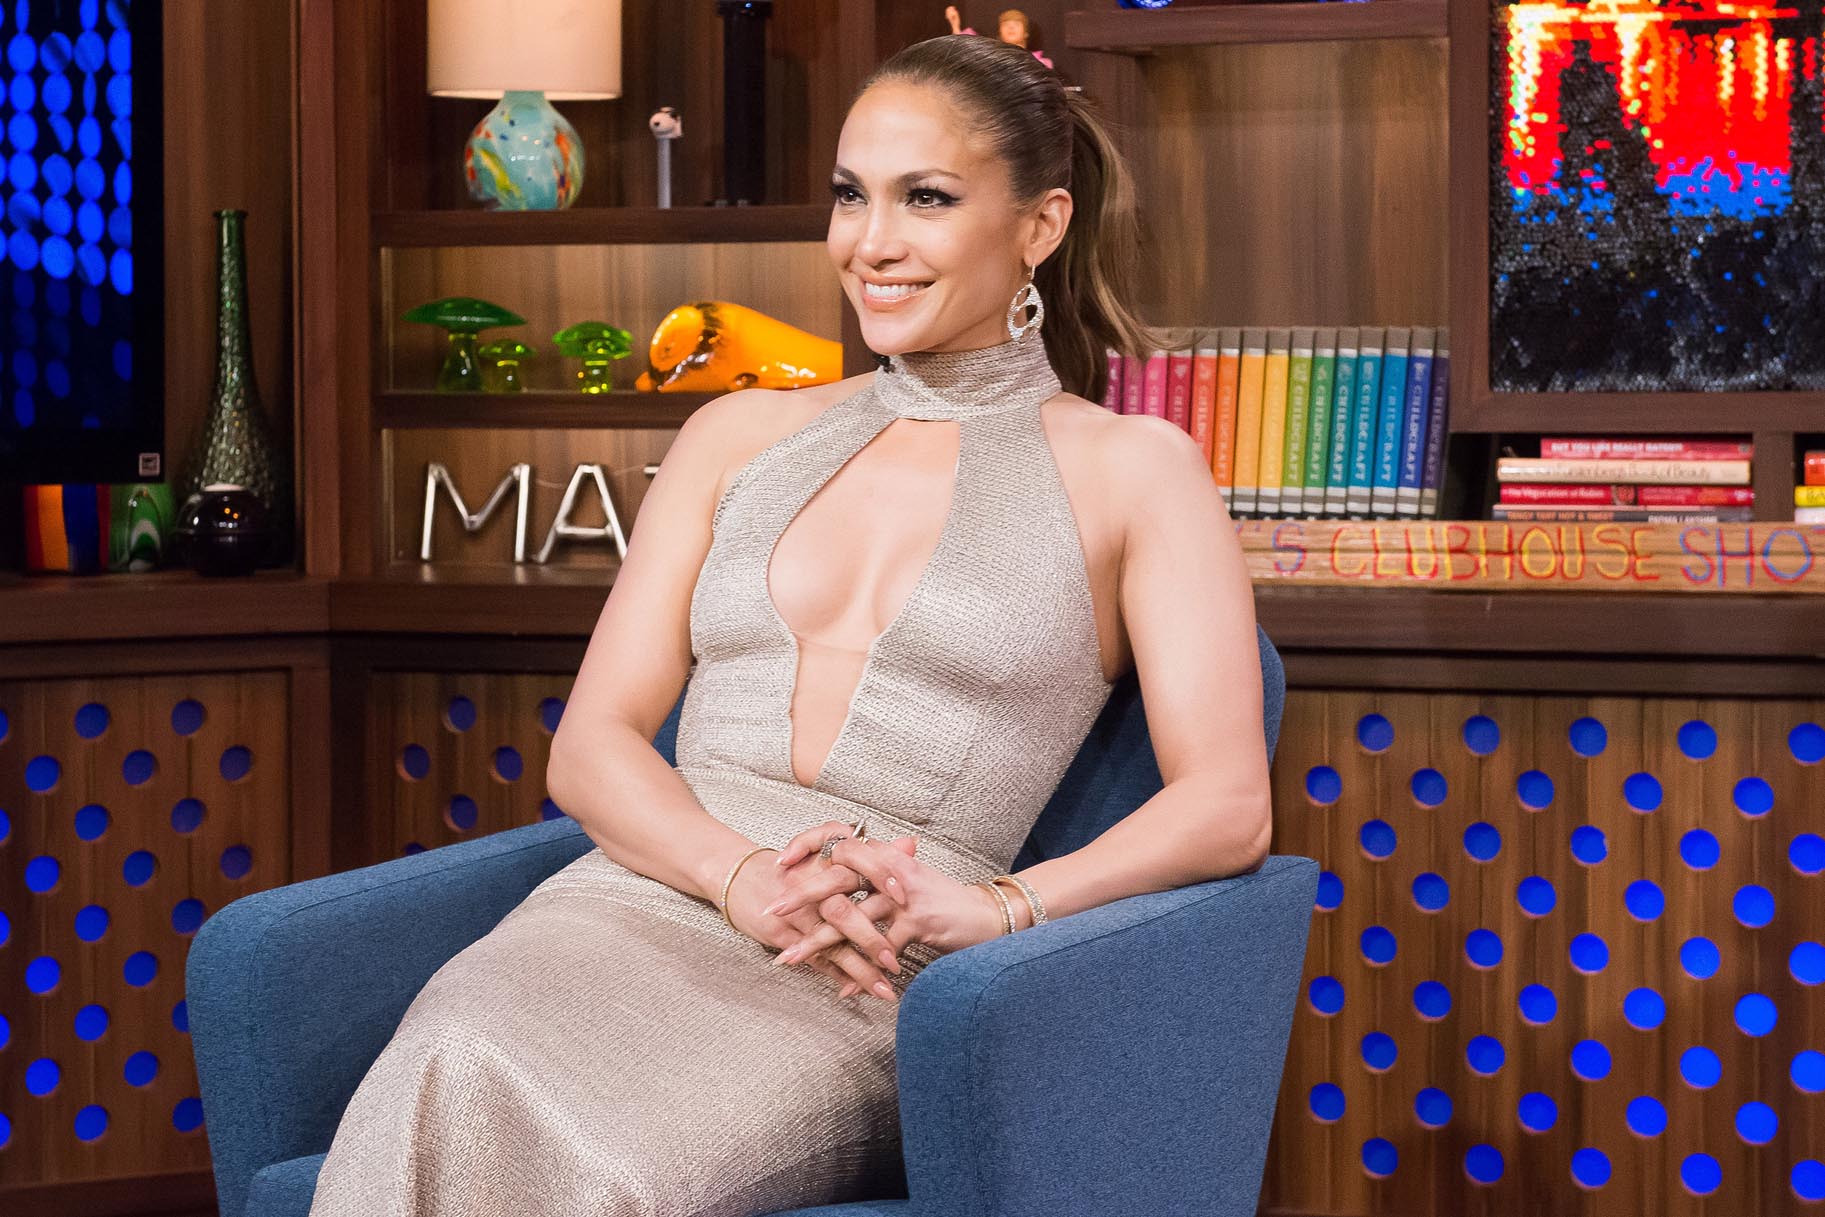 Jennifer Lopez wearing sexy silver dress while sitting on a blue couch